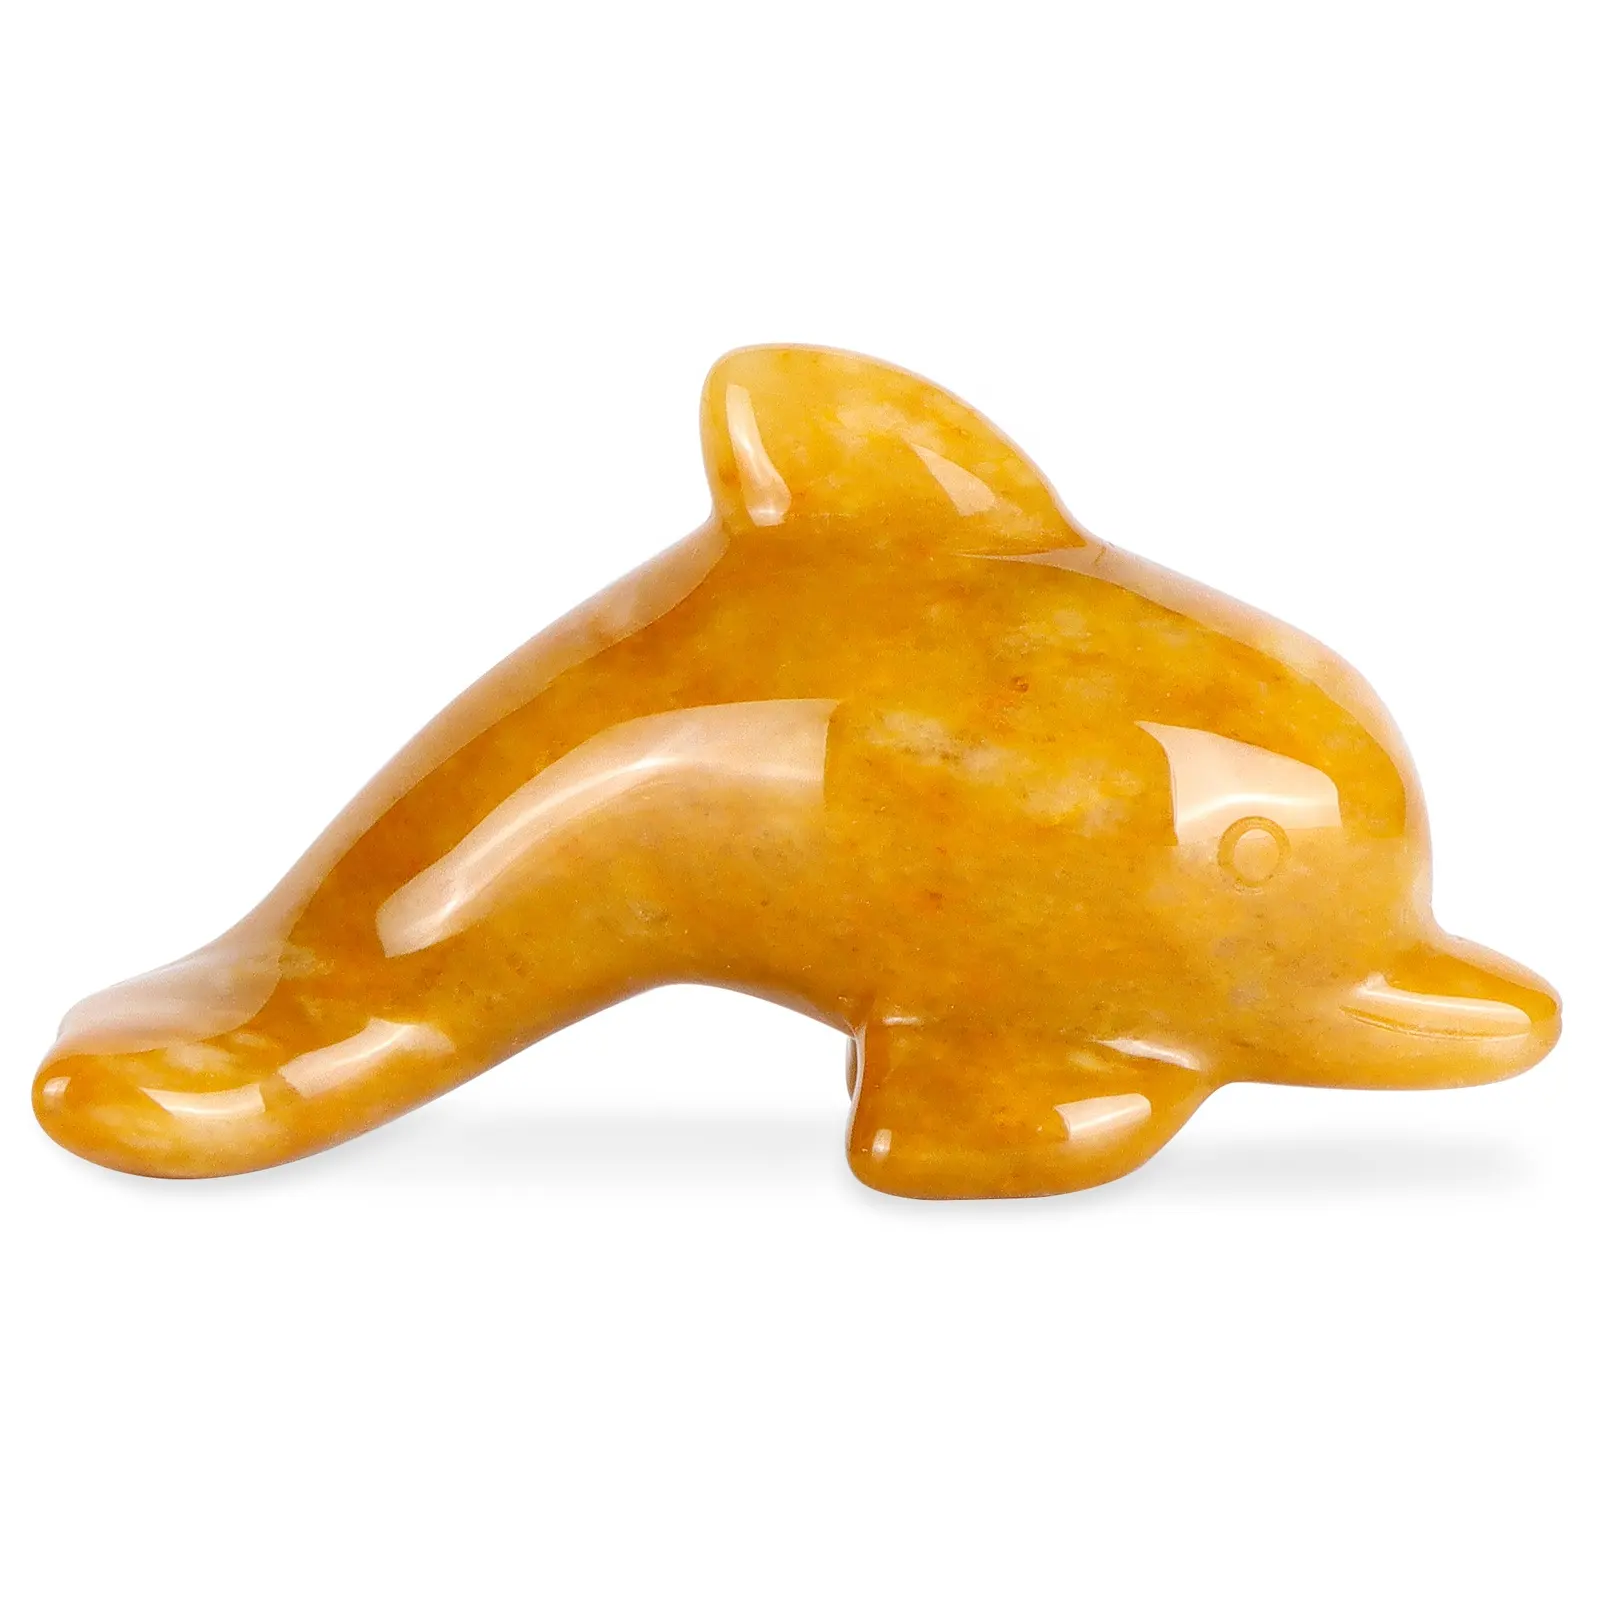 Crystal Gemstone Jumping Yellow Jade Dolphin Animal Carving Statue Craft Gifts for Fengshui Home Office Ornament Wholesaleui